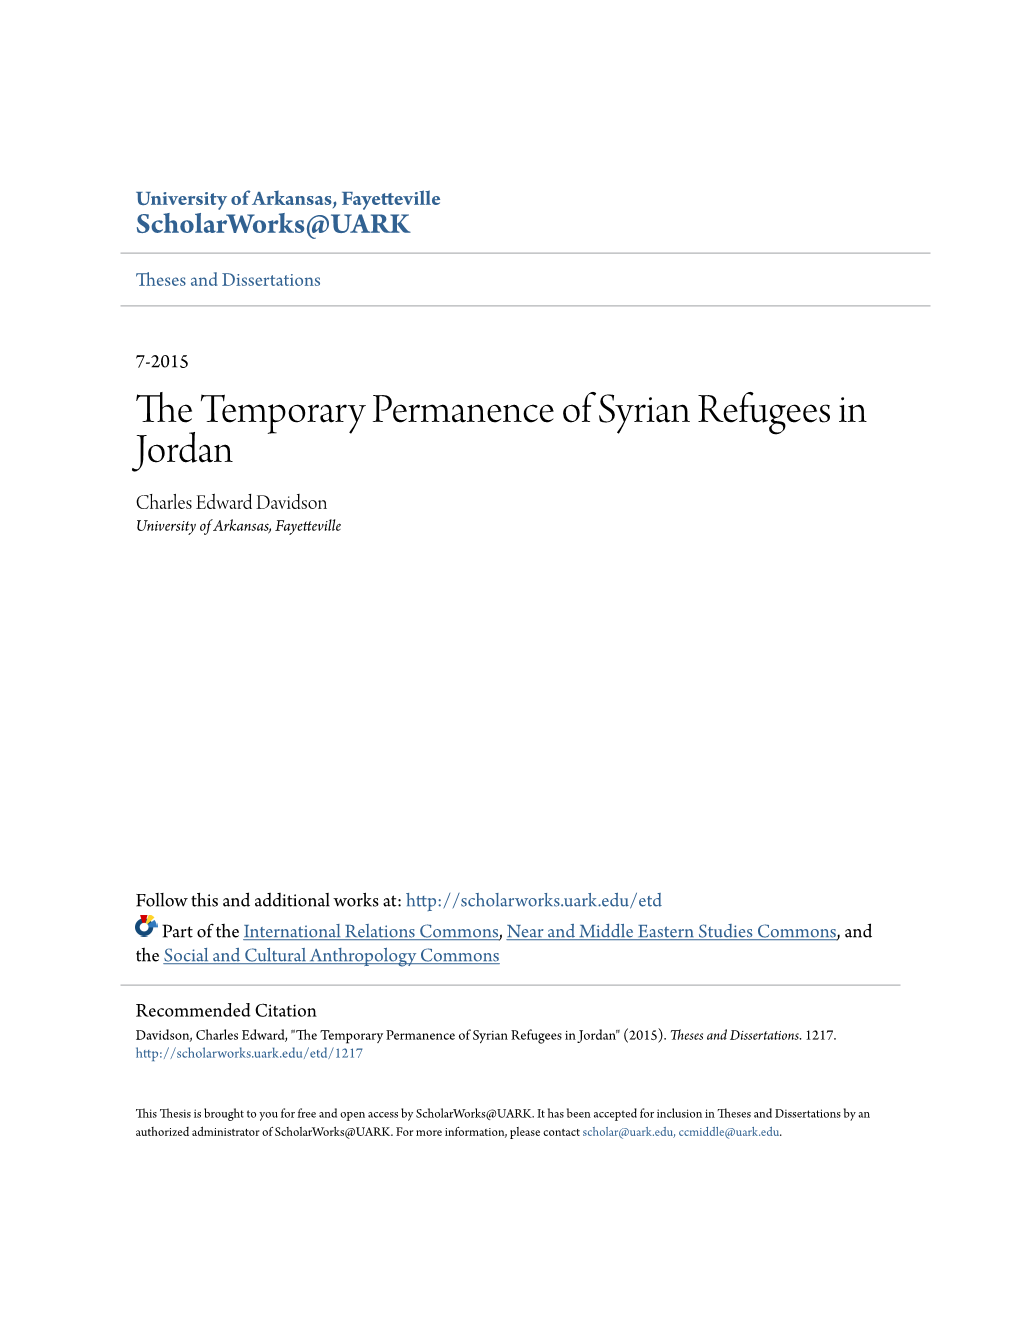 The Temporary Permanence of Syrian Refugees in Jordan the Temporary Permanence of Syrian Refugees in Jordan